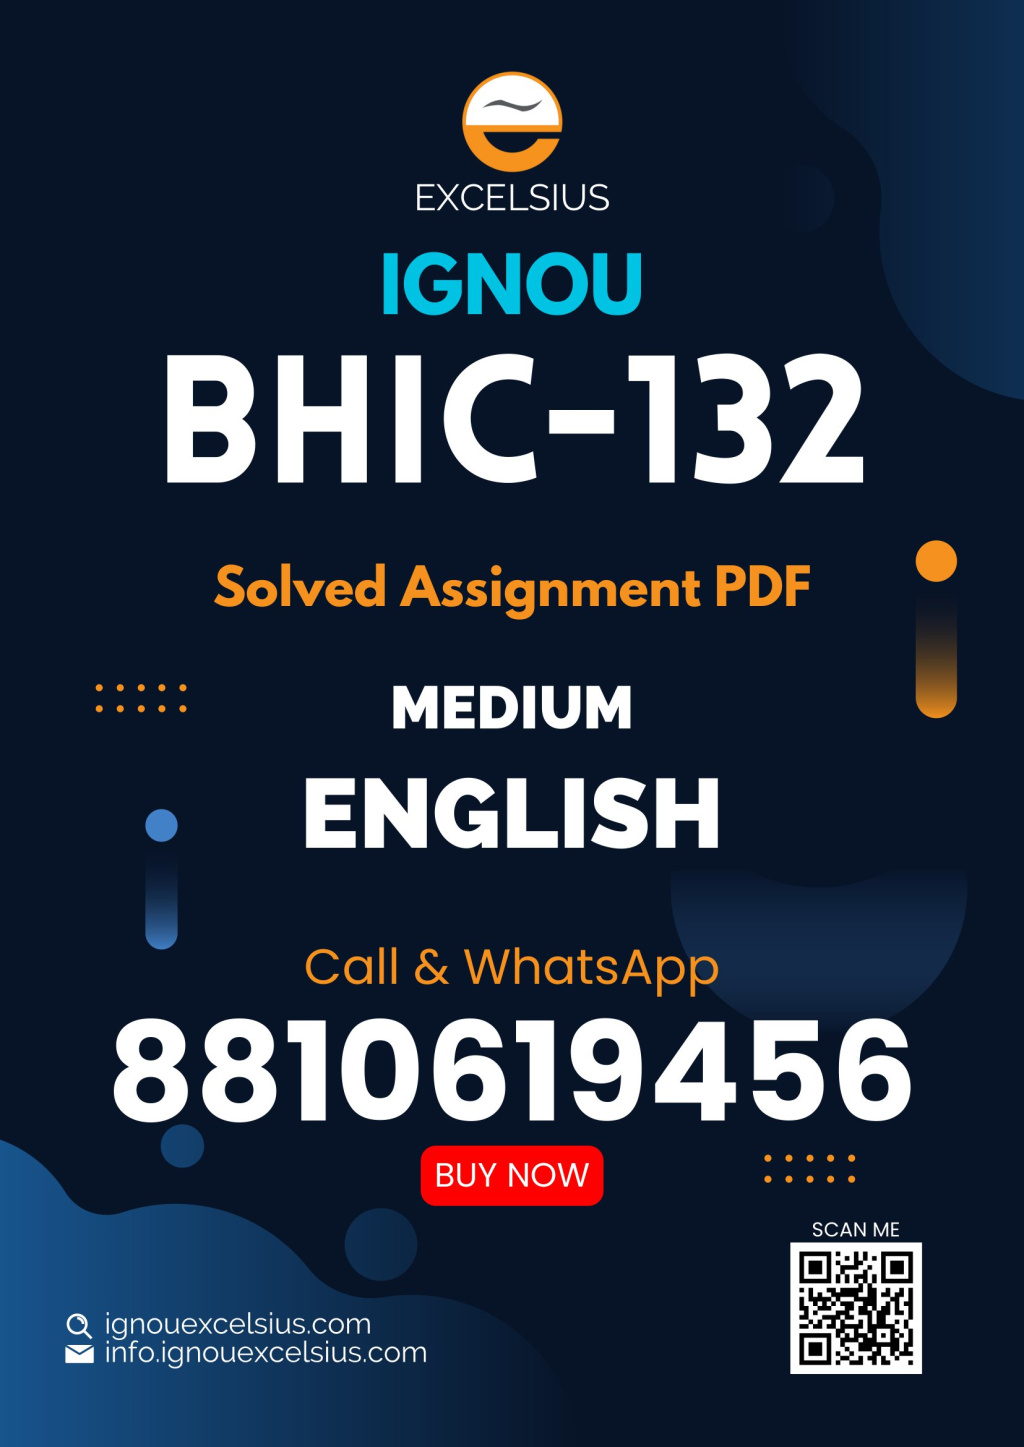 IGNOU BHIC-132 - History of India from C. 300-1206 Latest Solved Assignment-July 2022 – January 2023